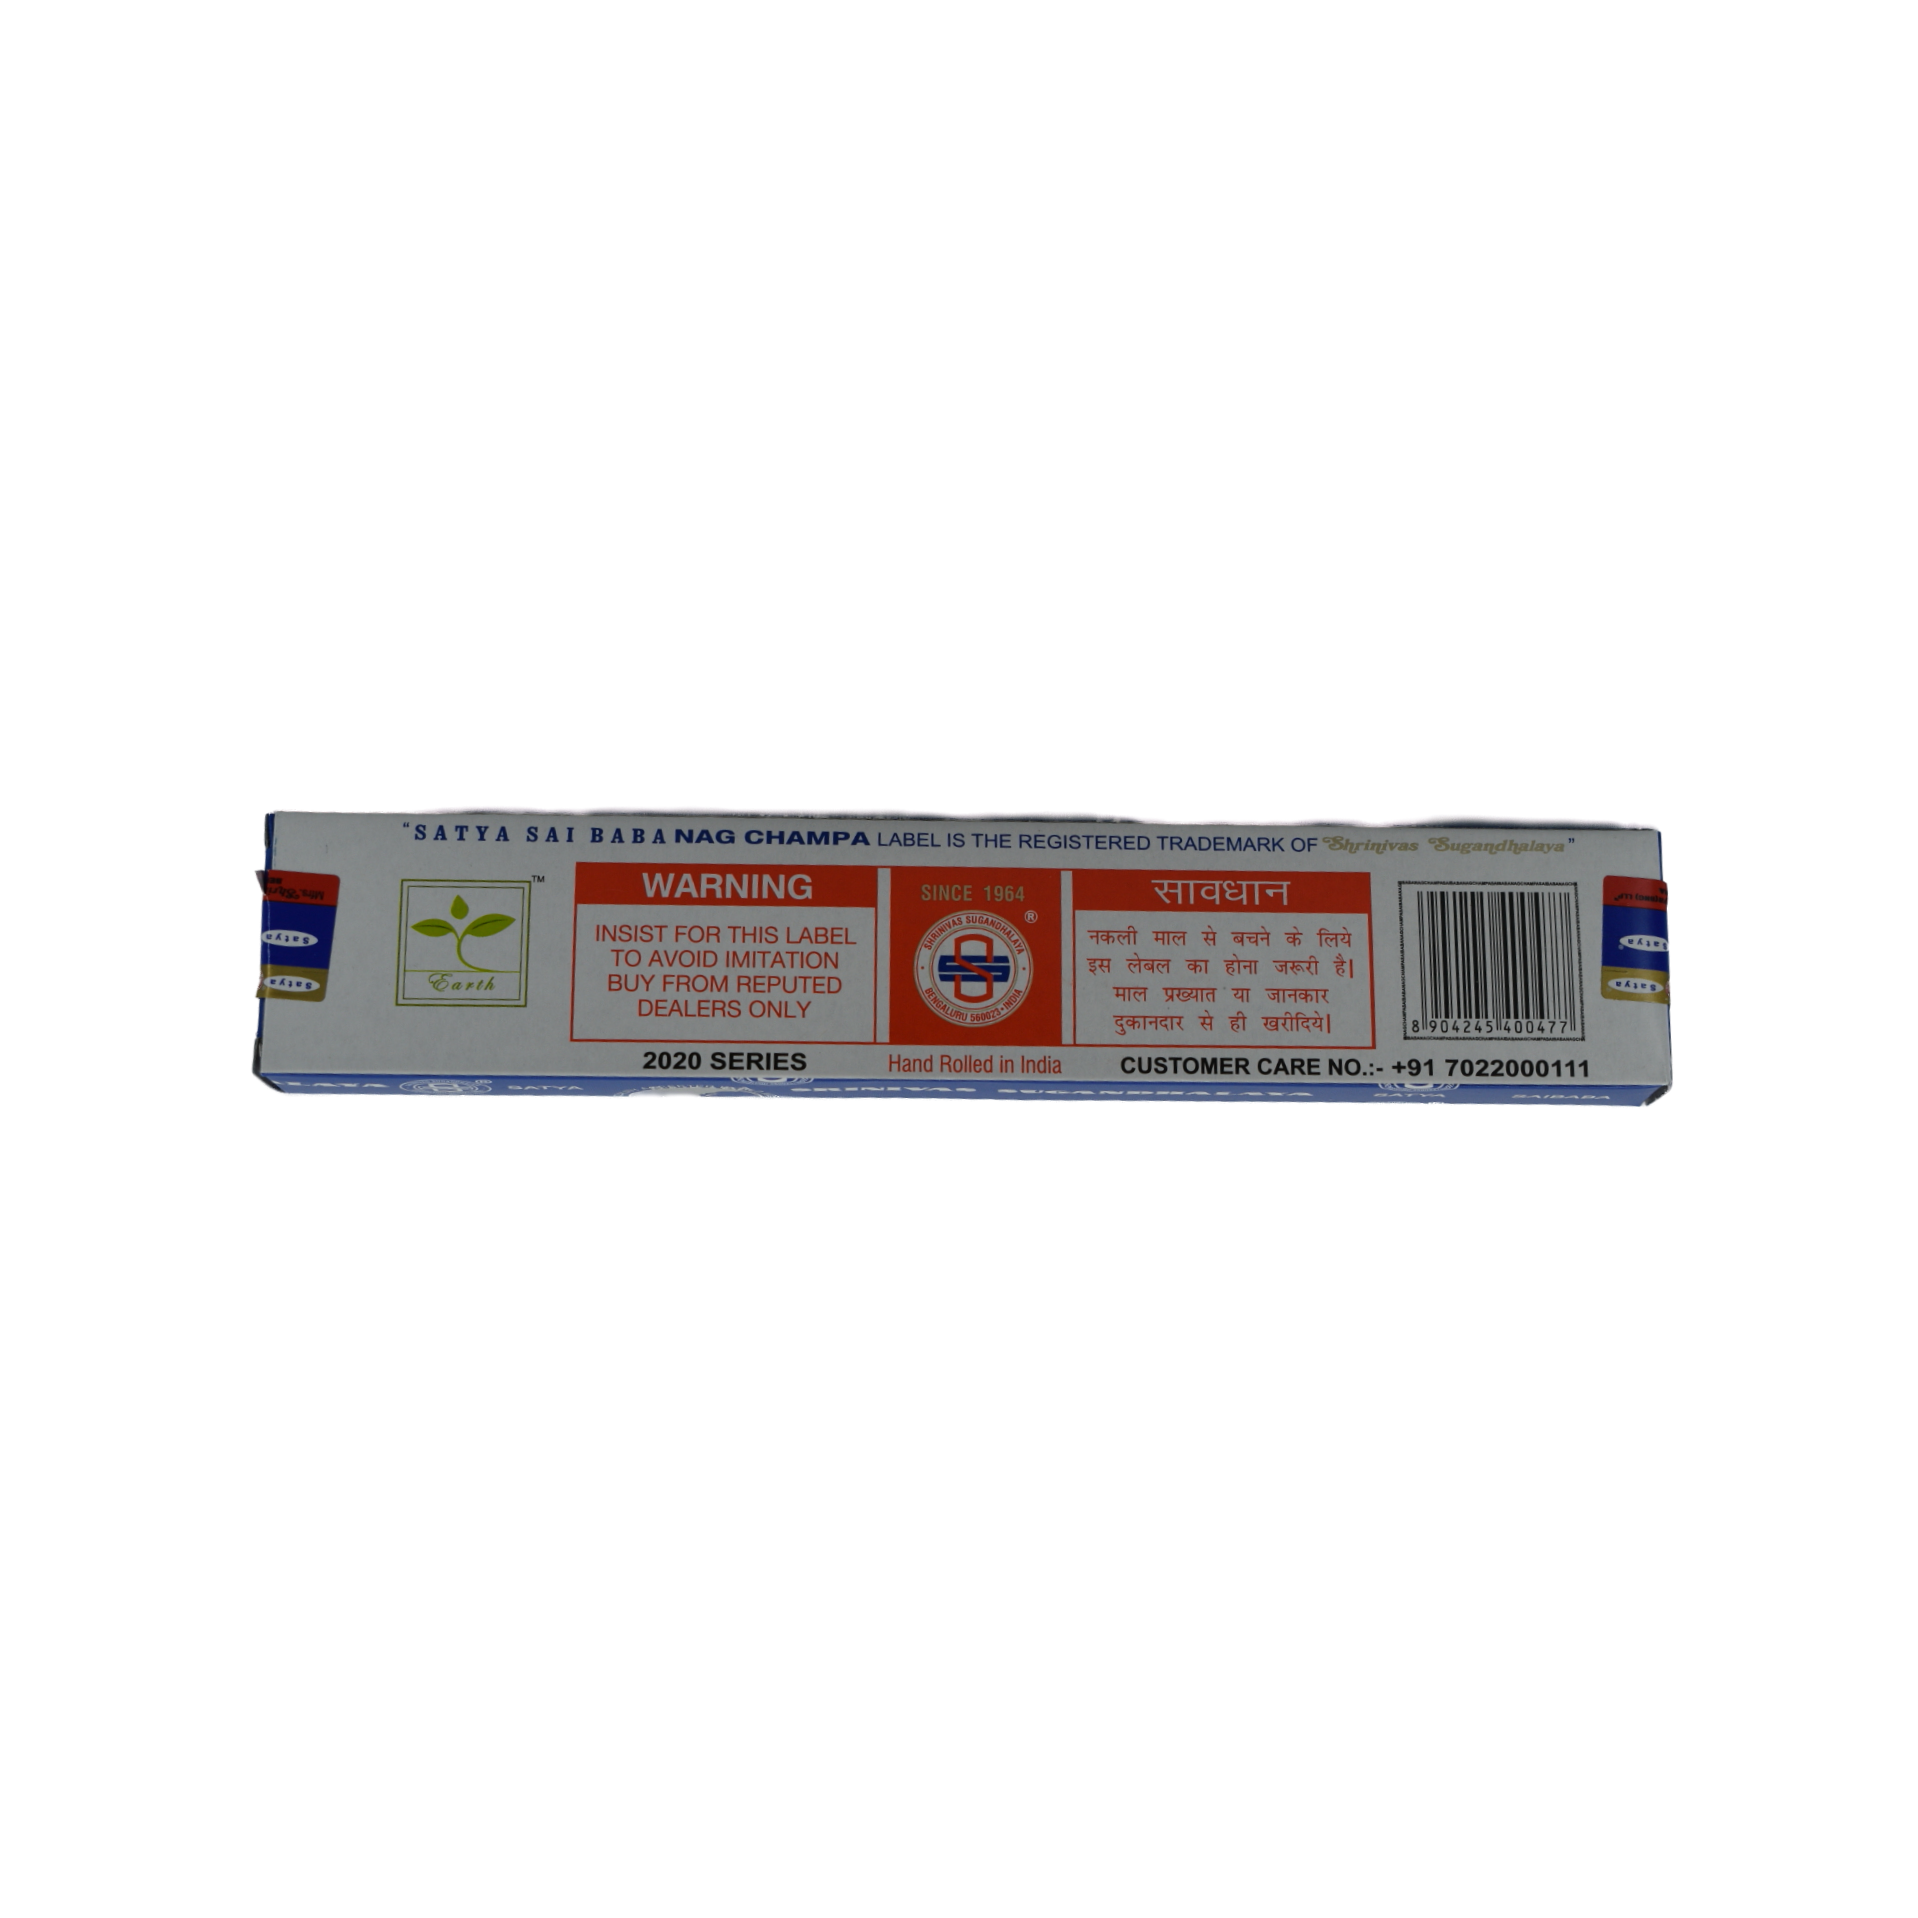 Nag Champa 100gr Incense Sticks back cover.  The bottom of the box is white.  The rectangle in the center is divided into three sections.  The left section has a red banner with white lettering that says Warning.  Below in red letters it say Insist for this label to avoid imitation buy from reputed dealers only.  The center section has a red box with a white circle in the middle with the company trademark logo.  Above the circle  title say Since 1964.  